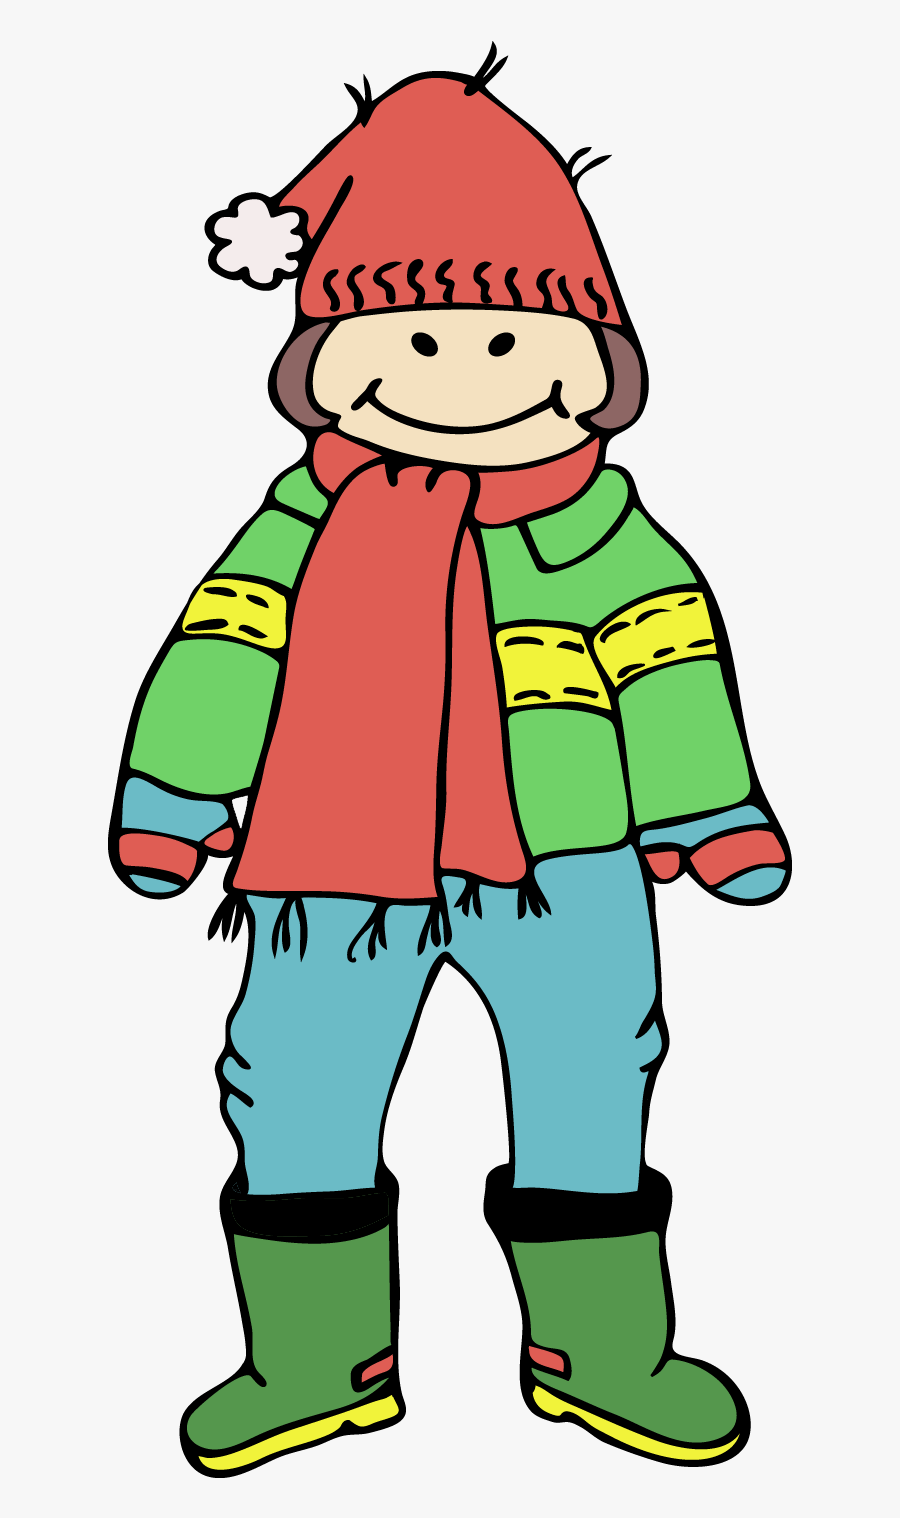 January Clipart Cold Weather Clothing - Wear Warm Clothes Clipart, Transparent Clipart